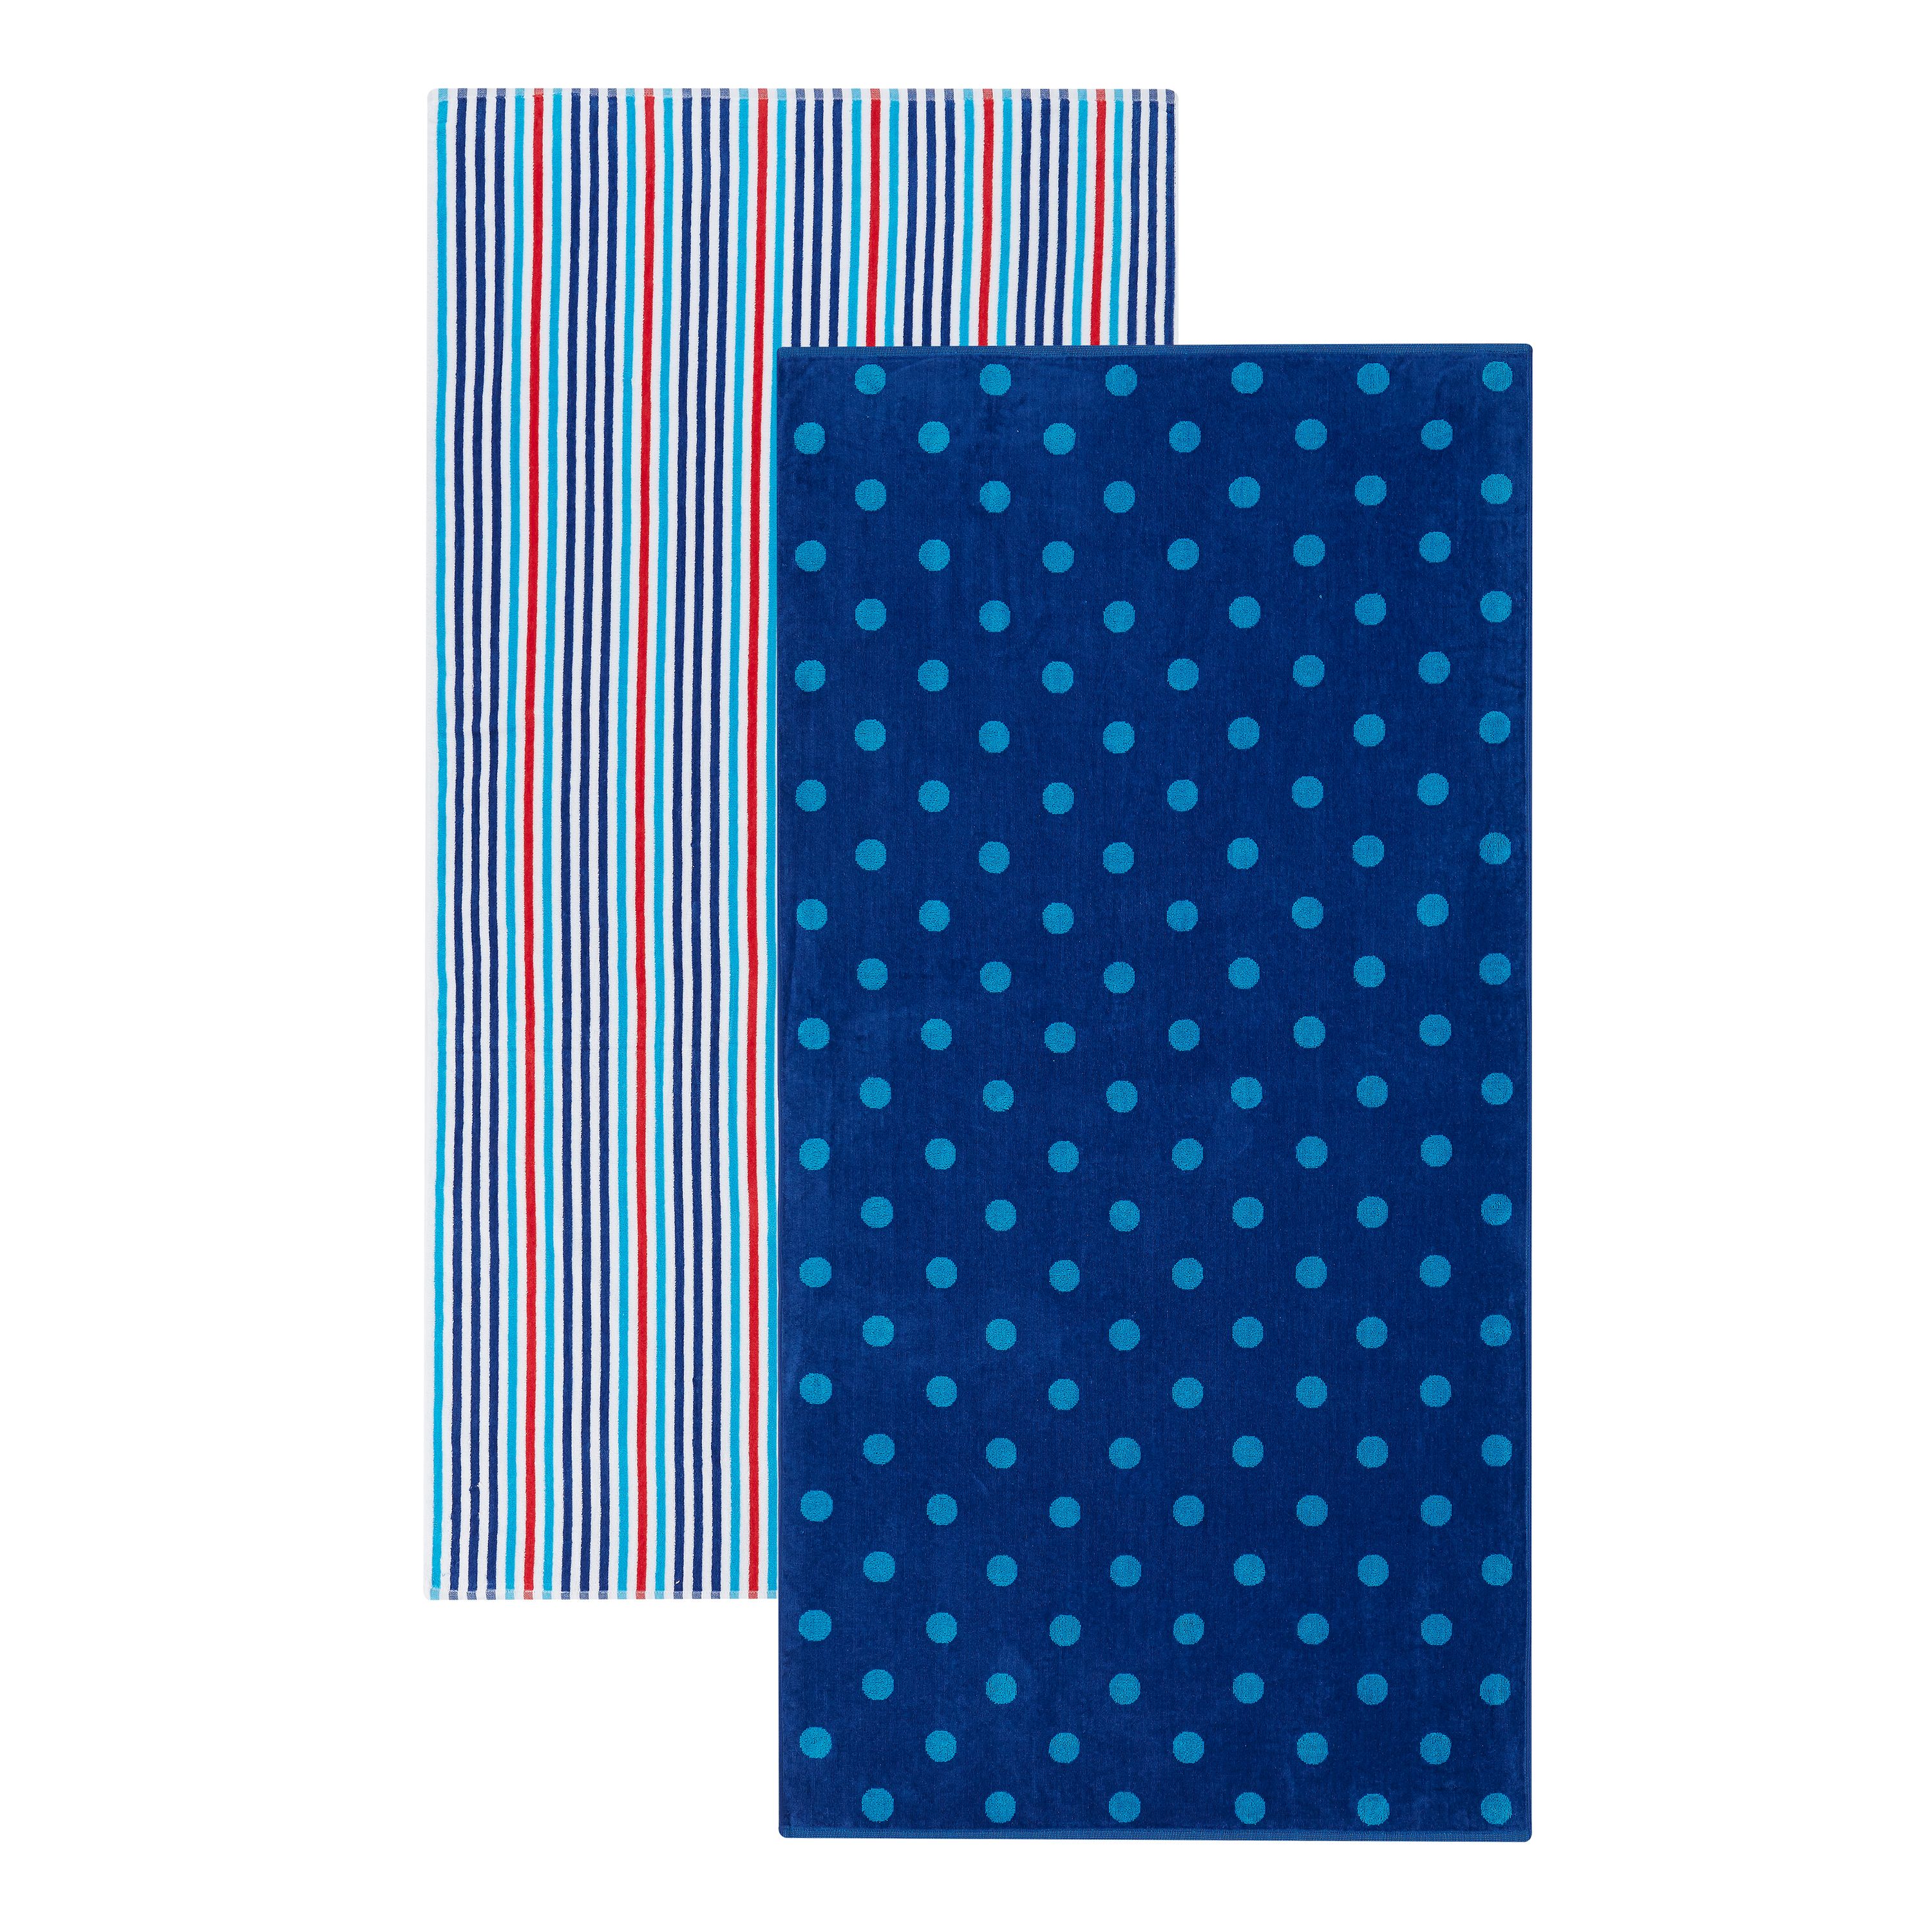 Mainstays Stripe and Polka Dot Reversible Cotton Beach Towel, 2 Pack - image 4 of 4